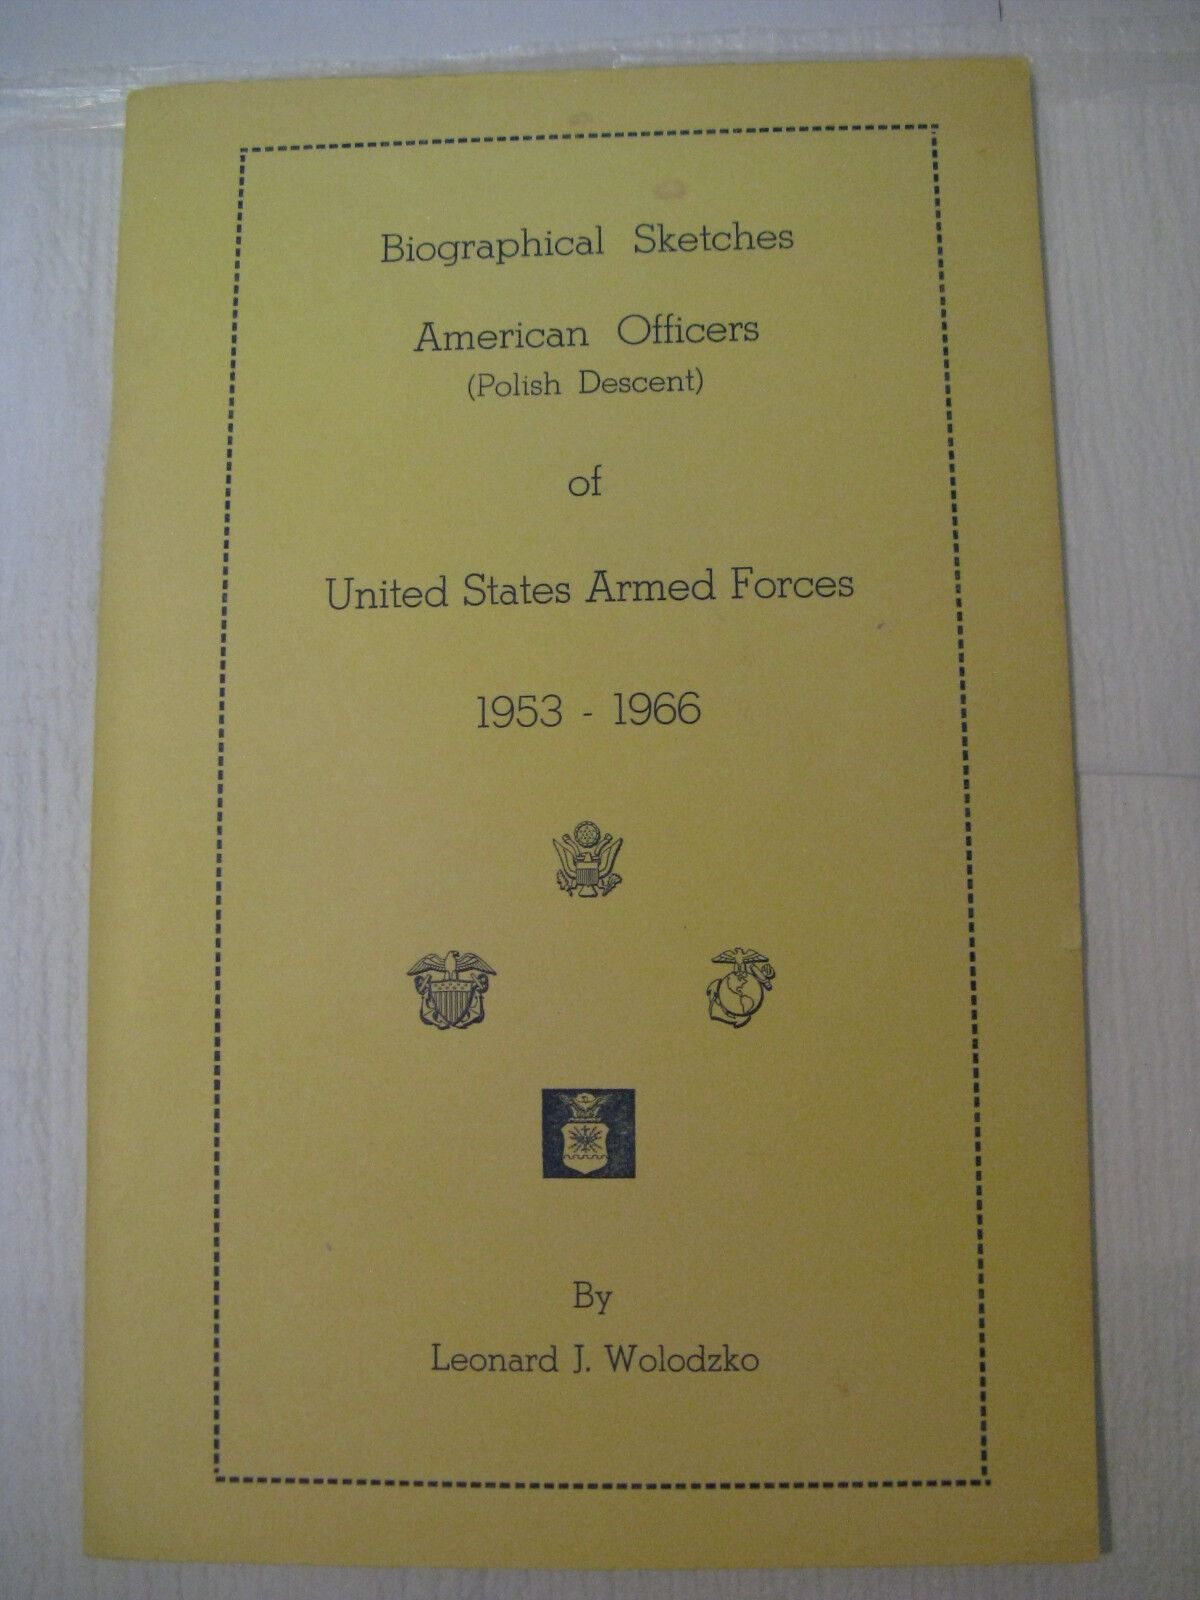 Biographical Sketches American Officers Of Polish Descent 1953 - 1966 Wolodzko